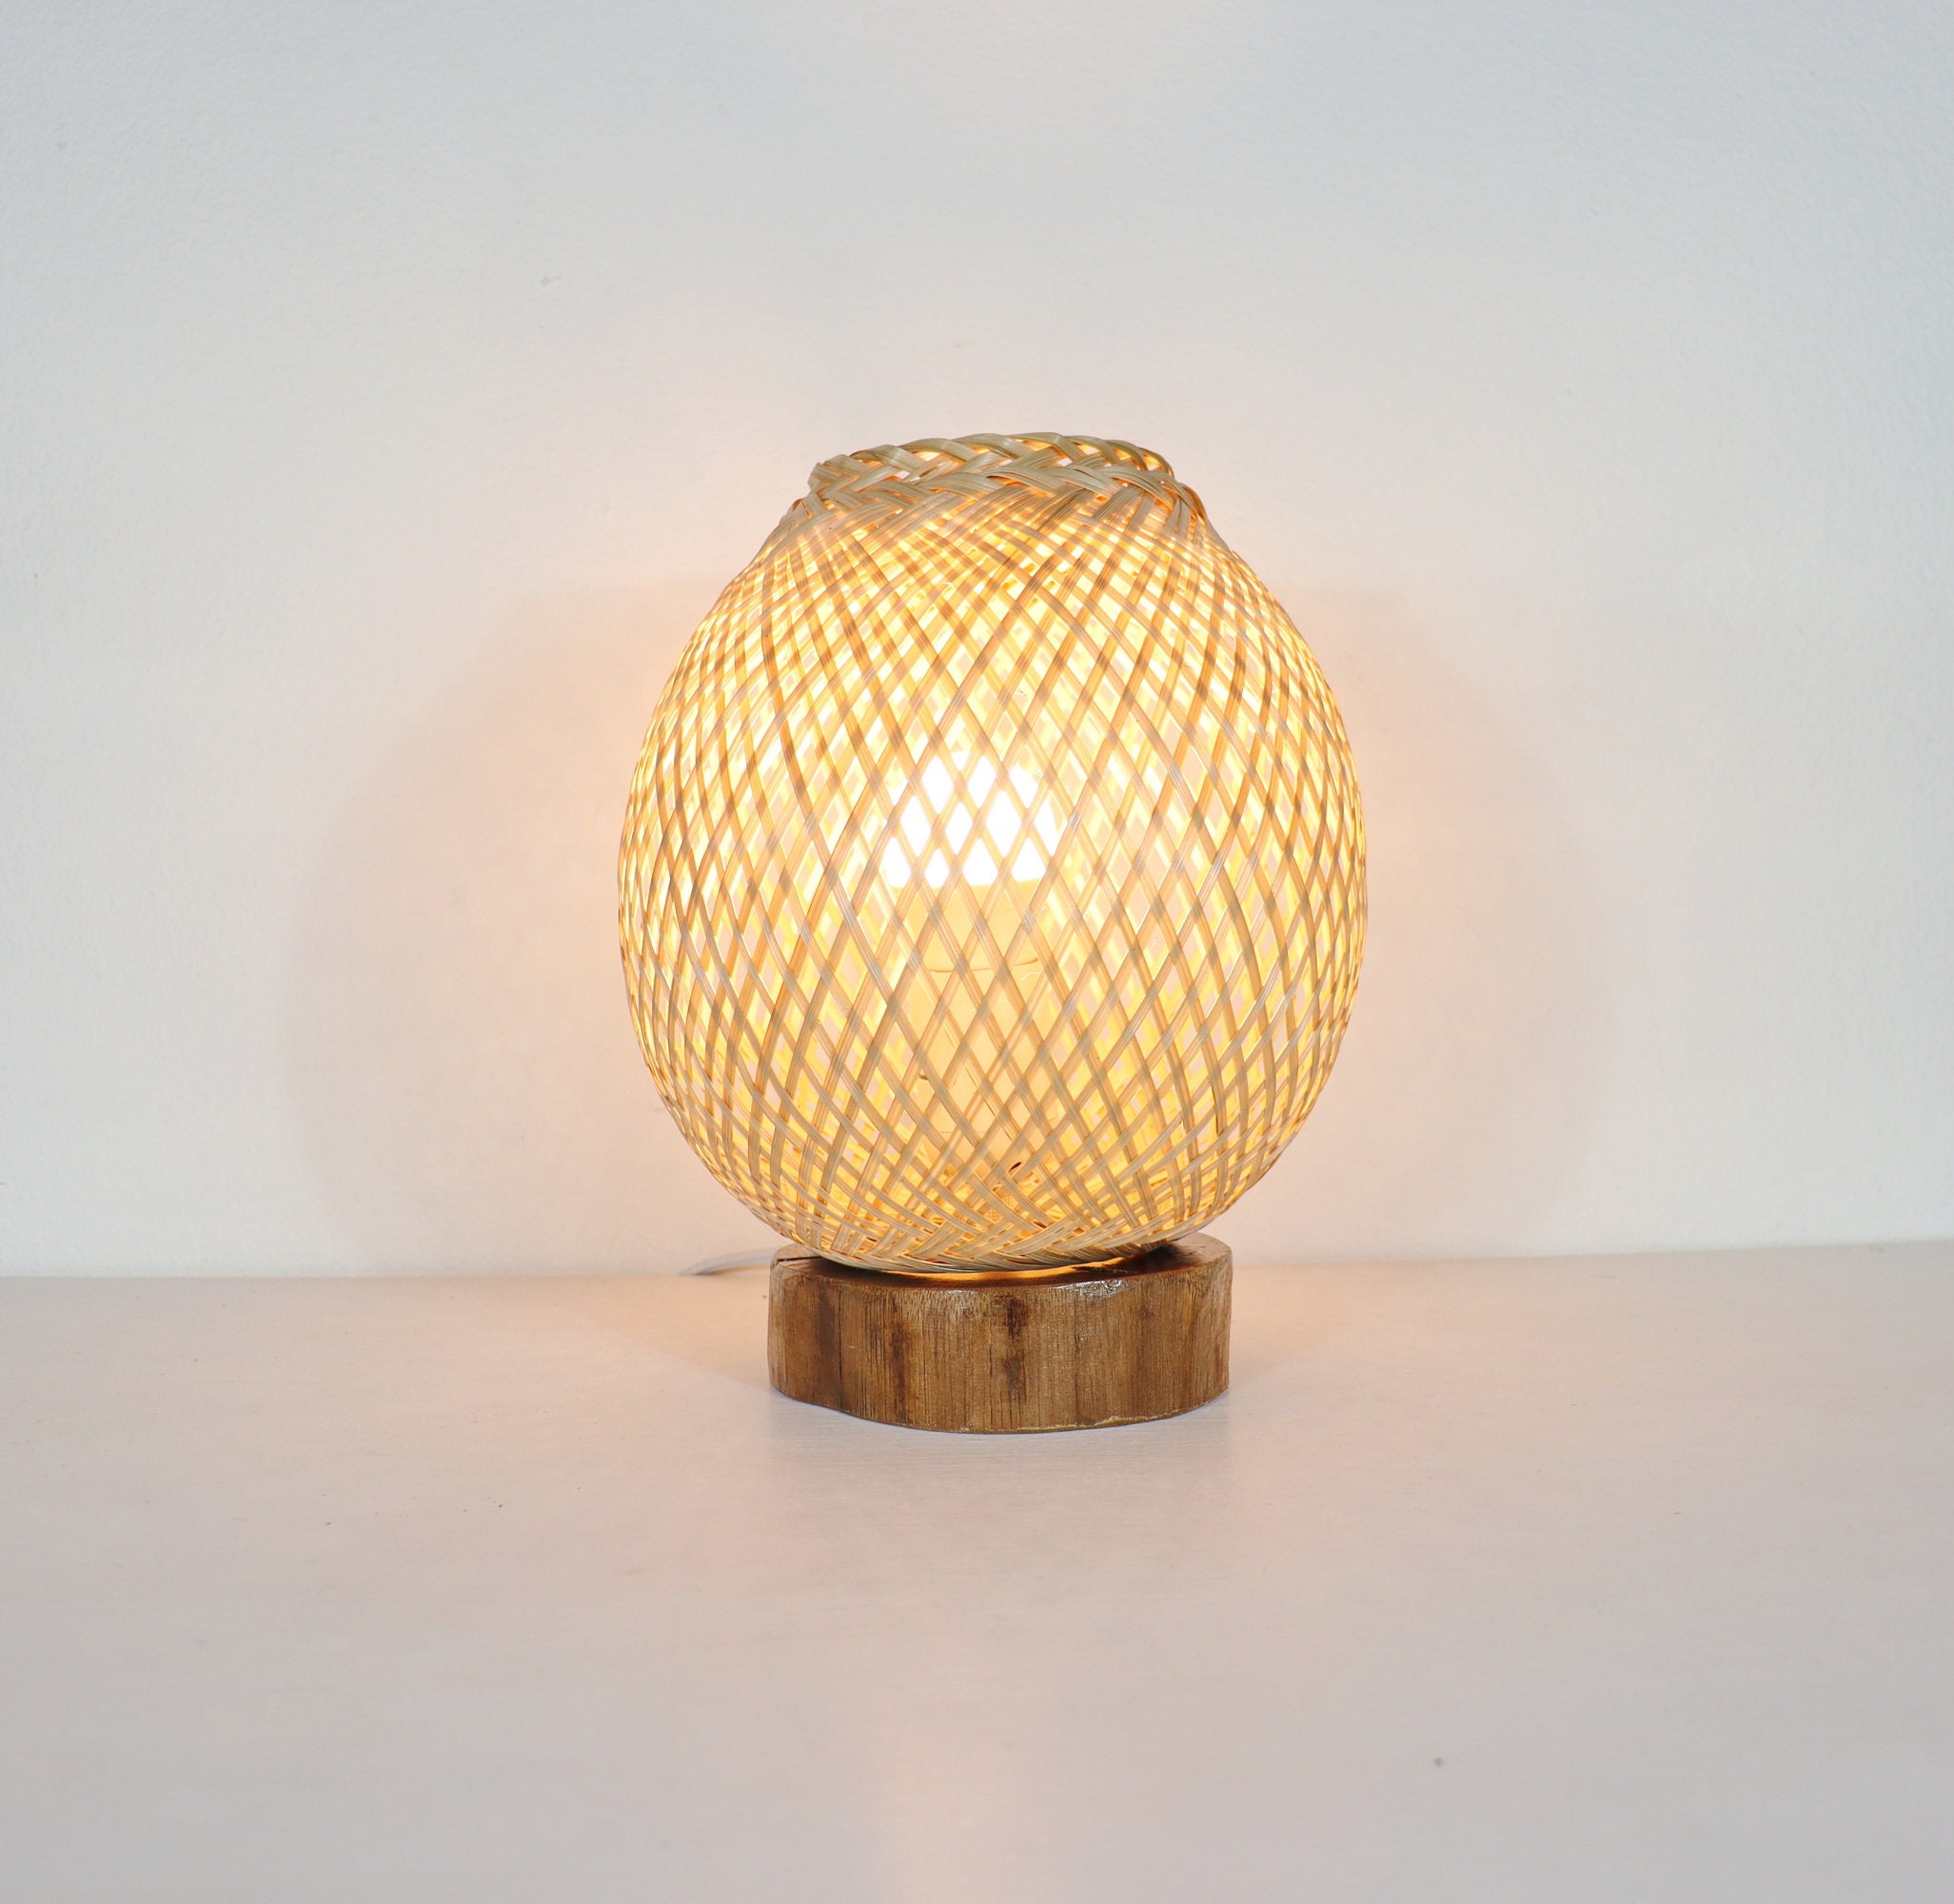 Small Bamboo Table Lamp: Unique Rustic and Boho Style - Etsy Israel